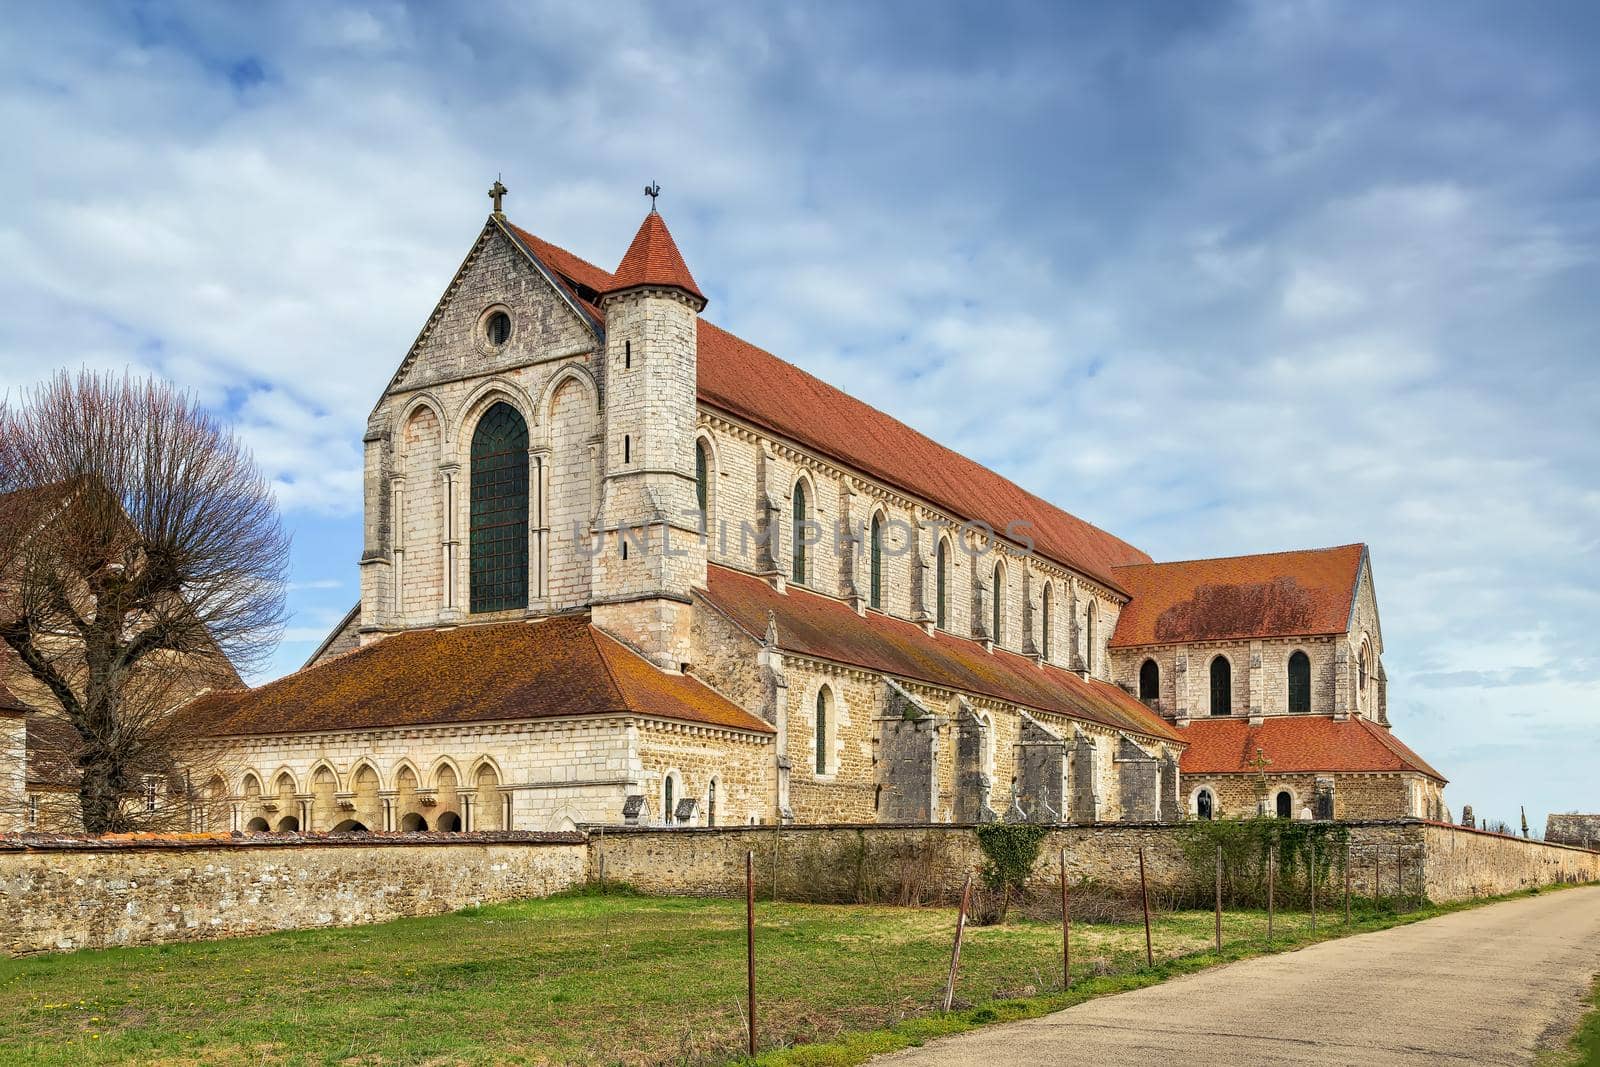 Pontigny Abbey was a Cistercian monastery located in Pontigny in Burgundy, France. View from facade